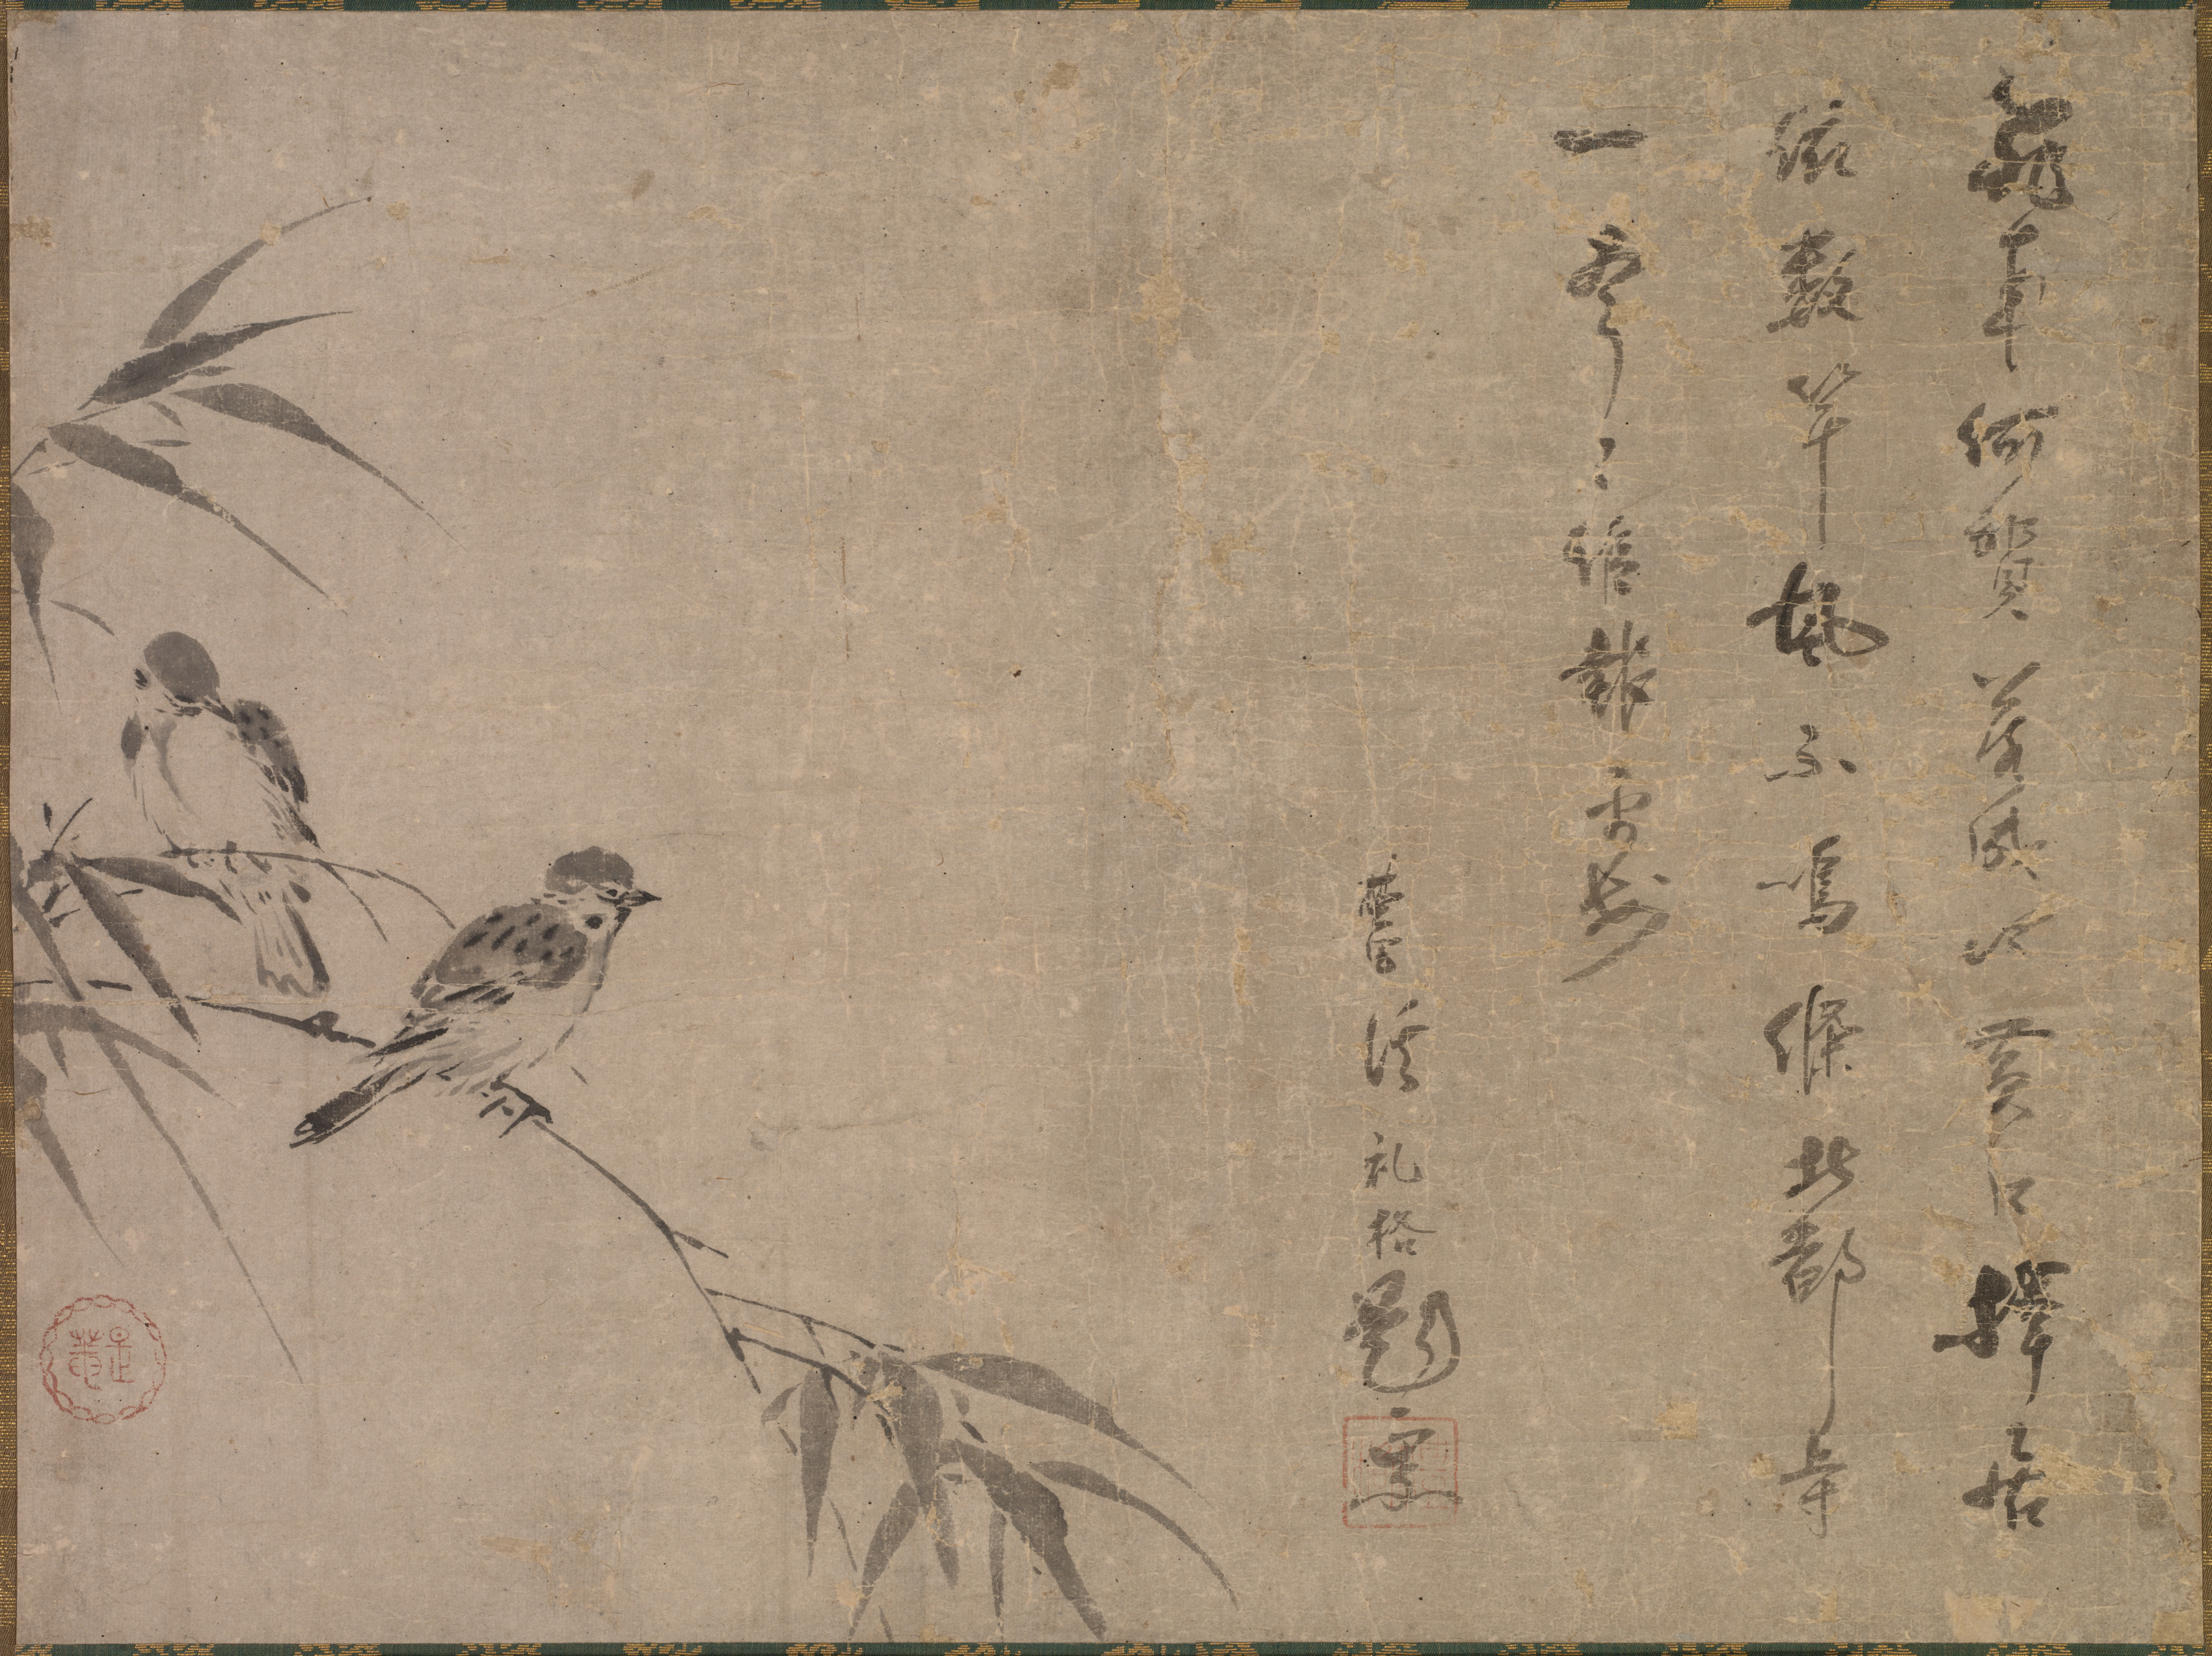 Sparrows and Bamboo